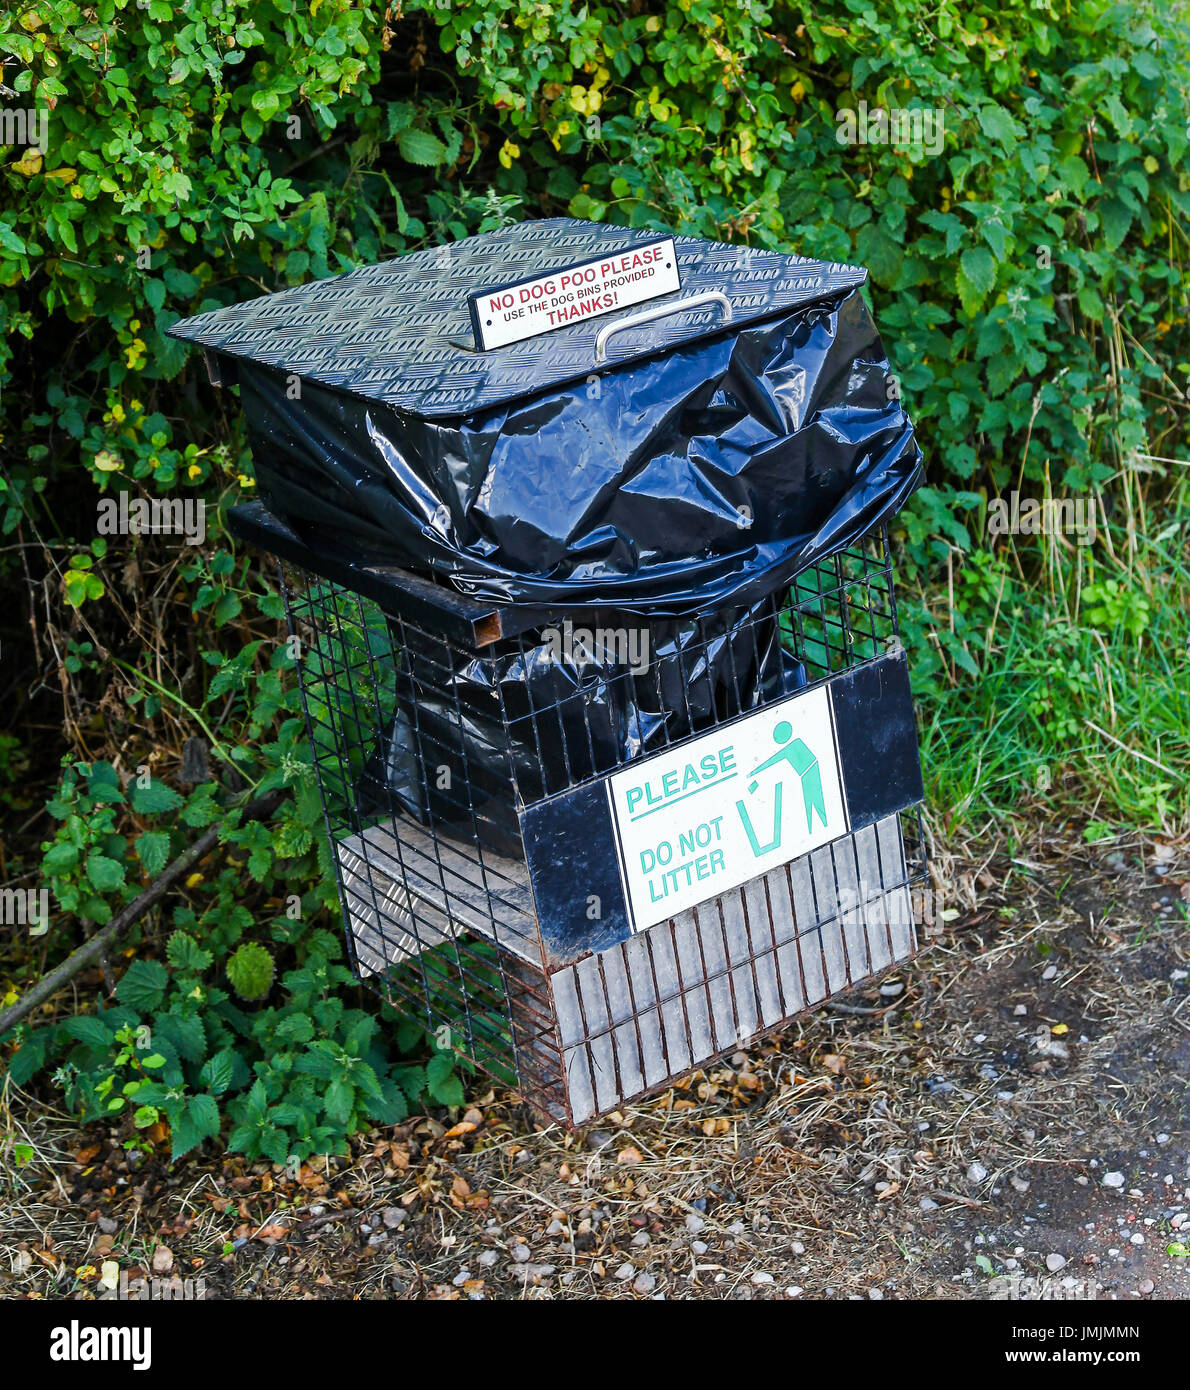 A litter or waste bin with a sign on it saying 'no dog poo please use bins provided' Stock Photo